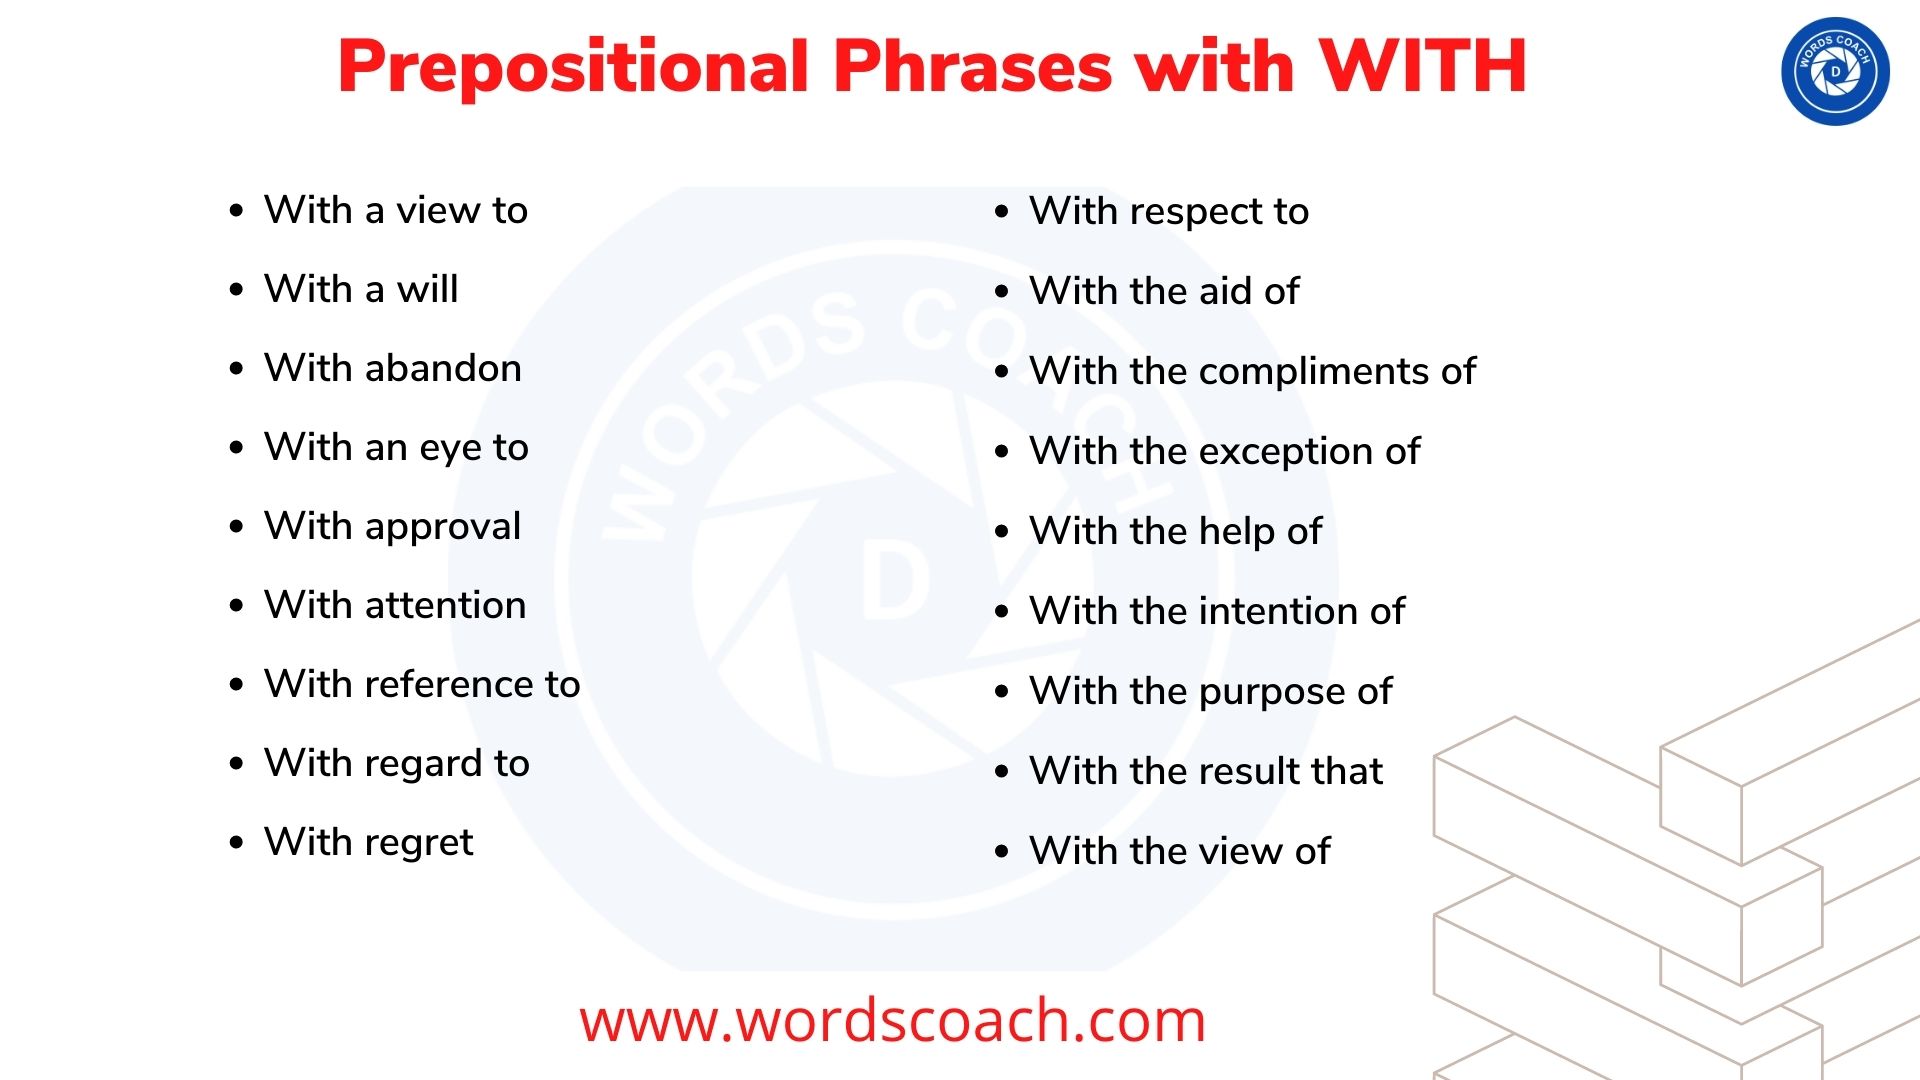 Prepositional Phrases with WITH - wordscoach.com